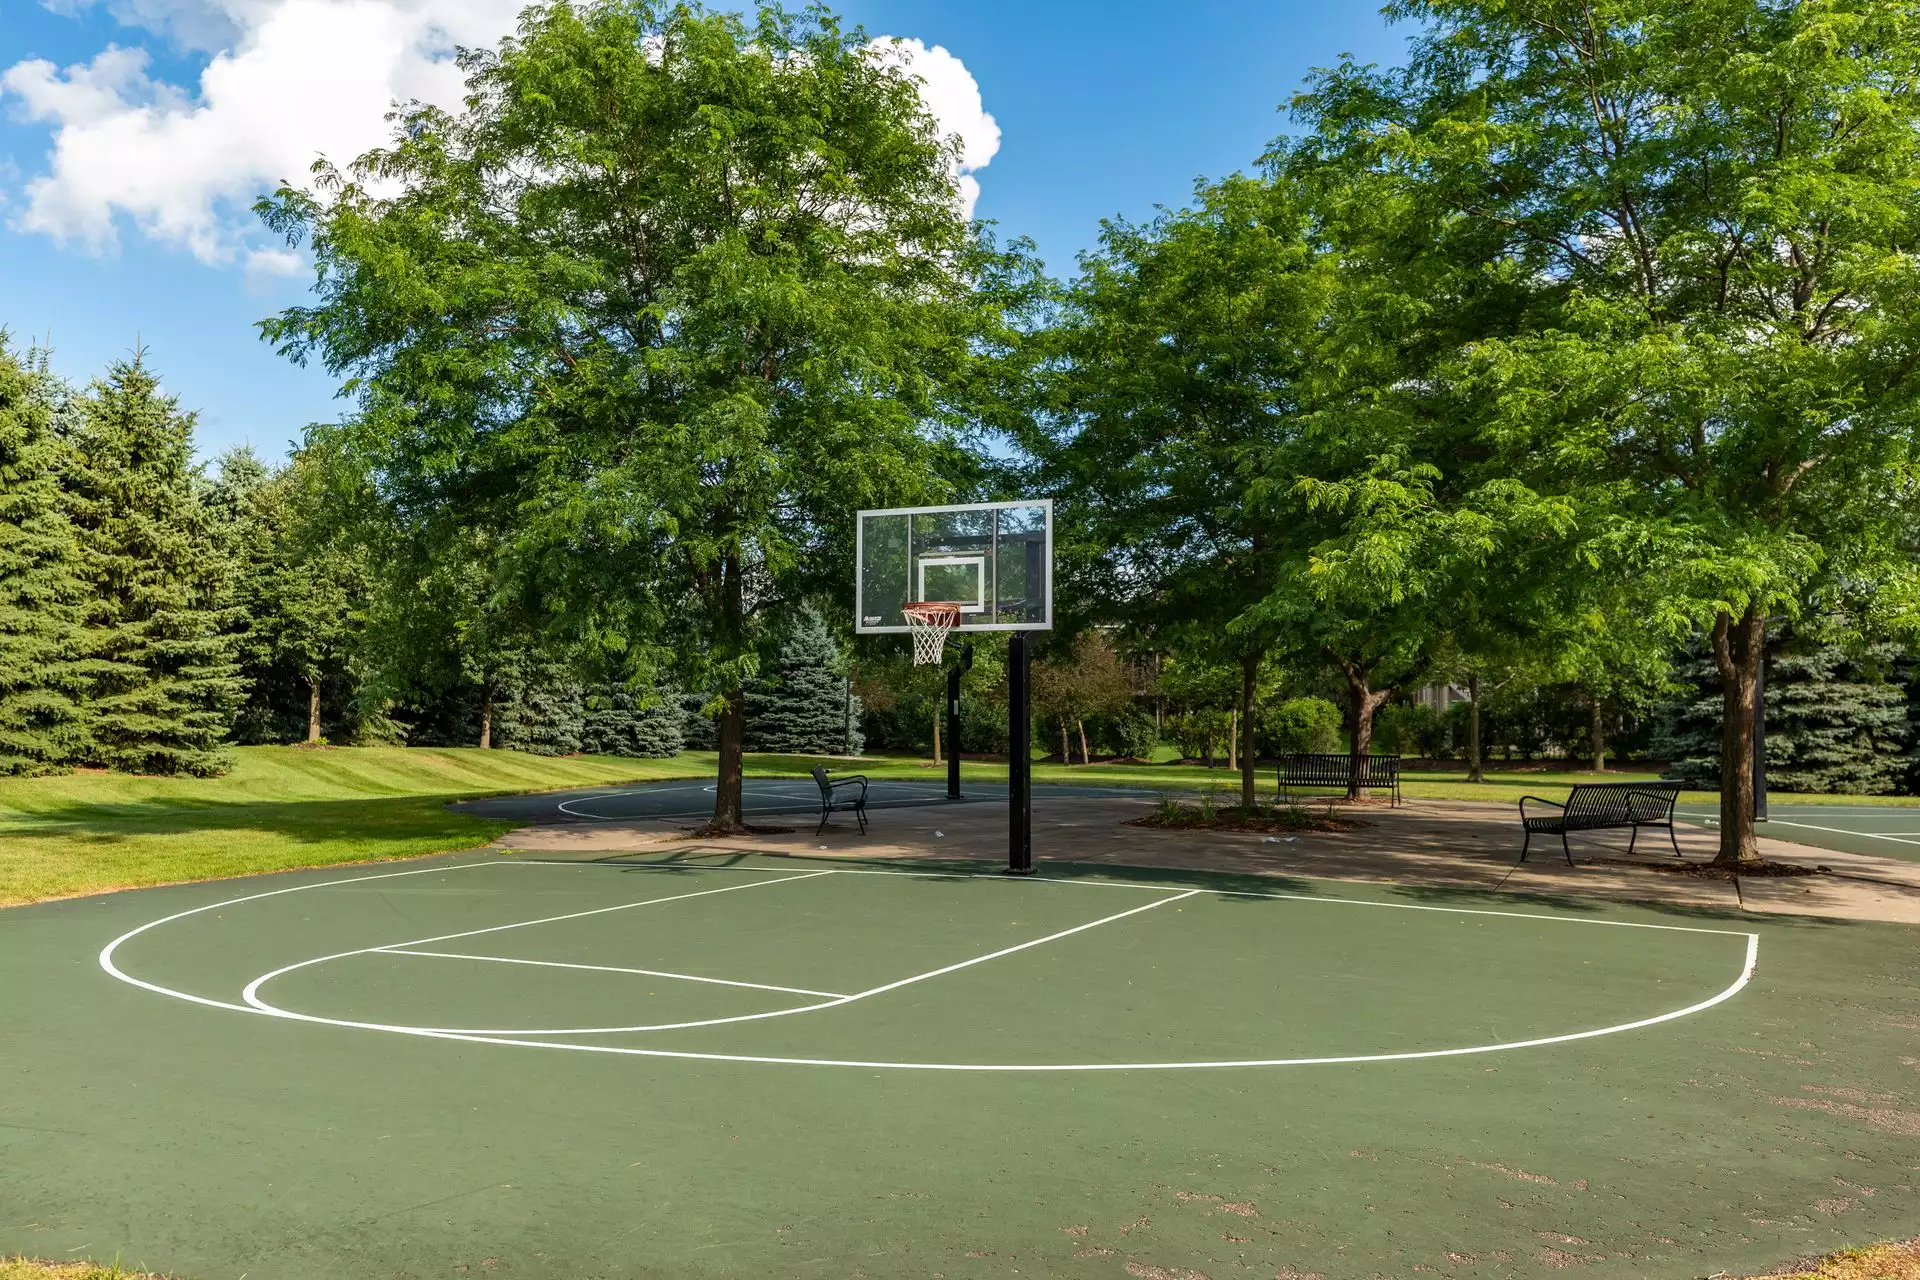 Woodbury Home For Sale Dancing Waters Basketball Court